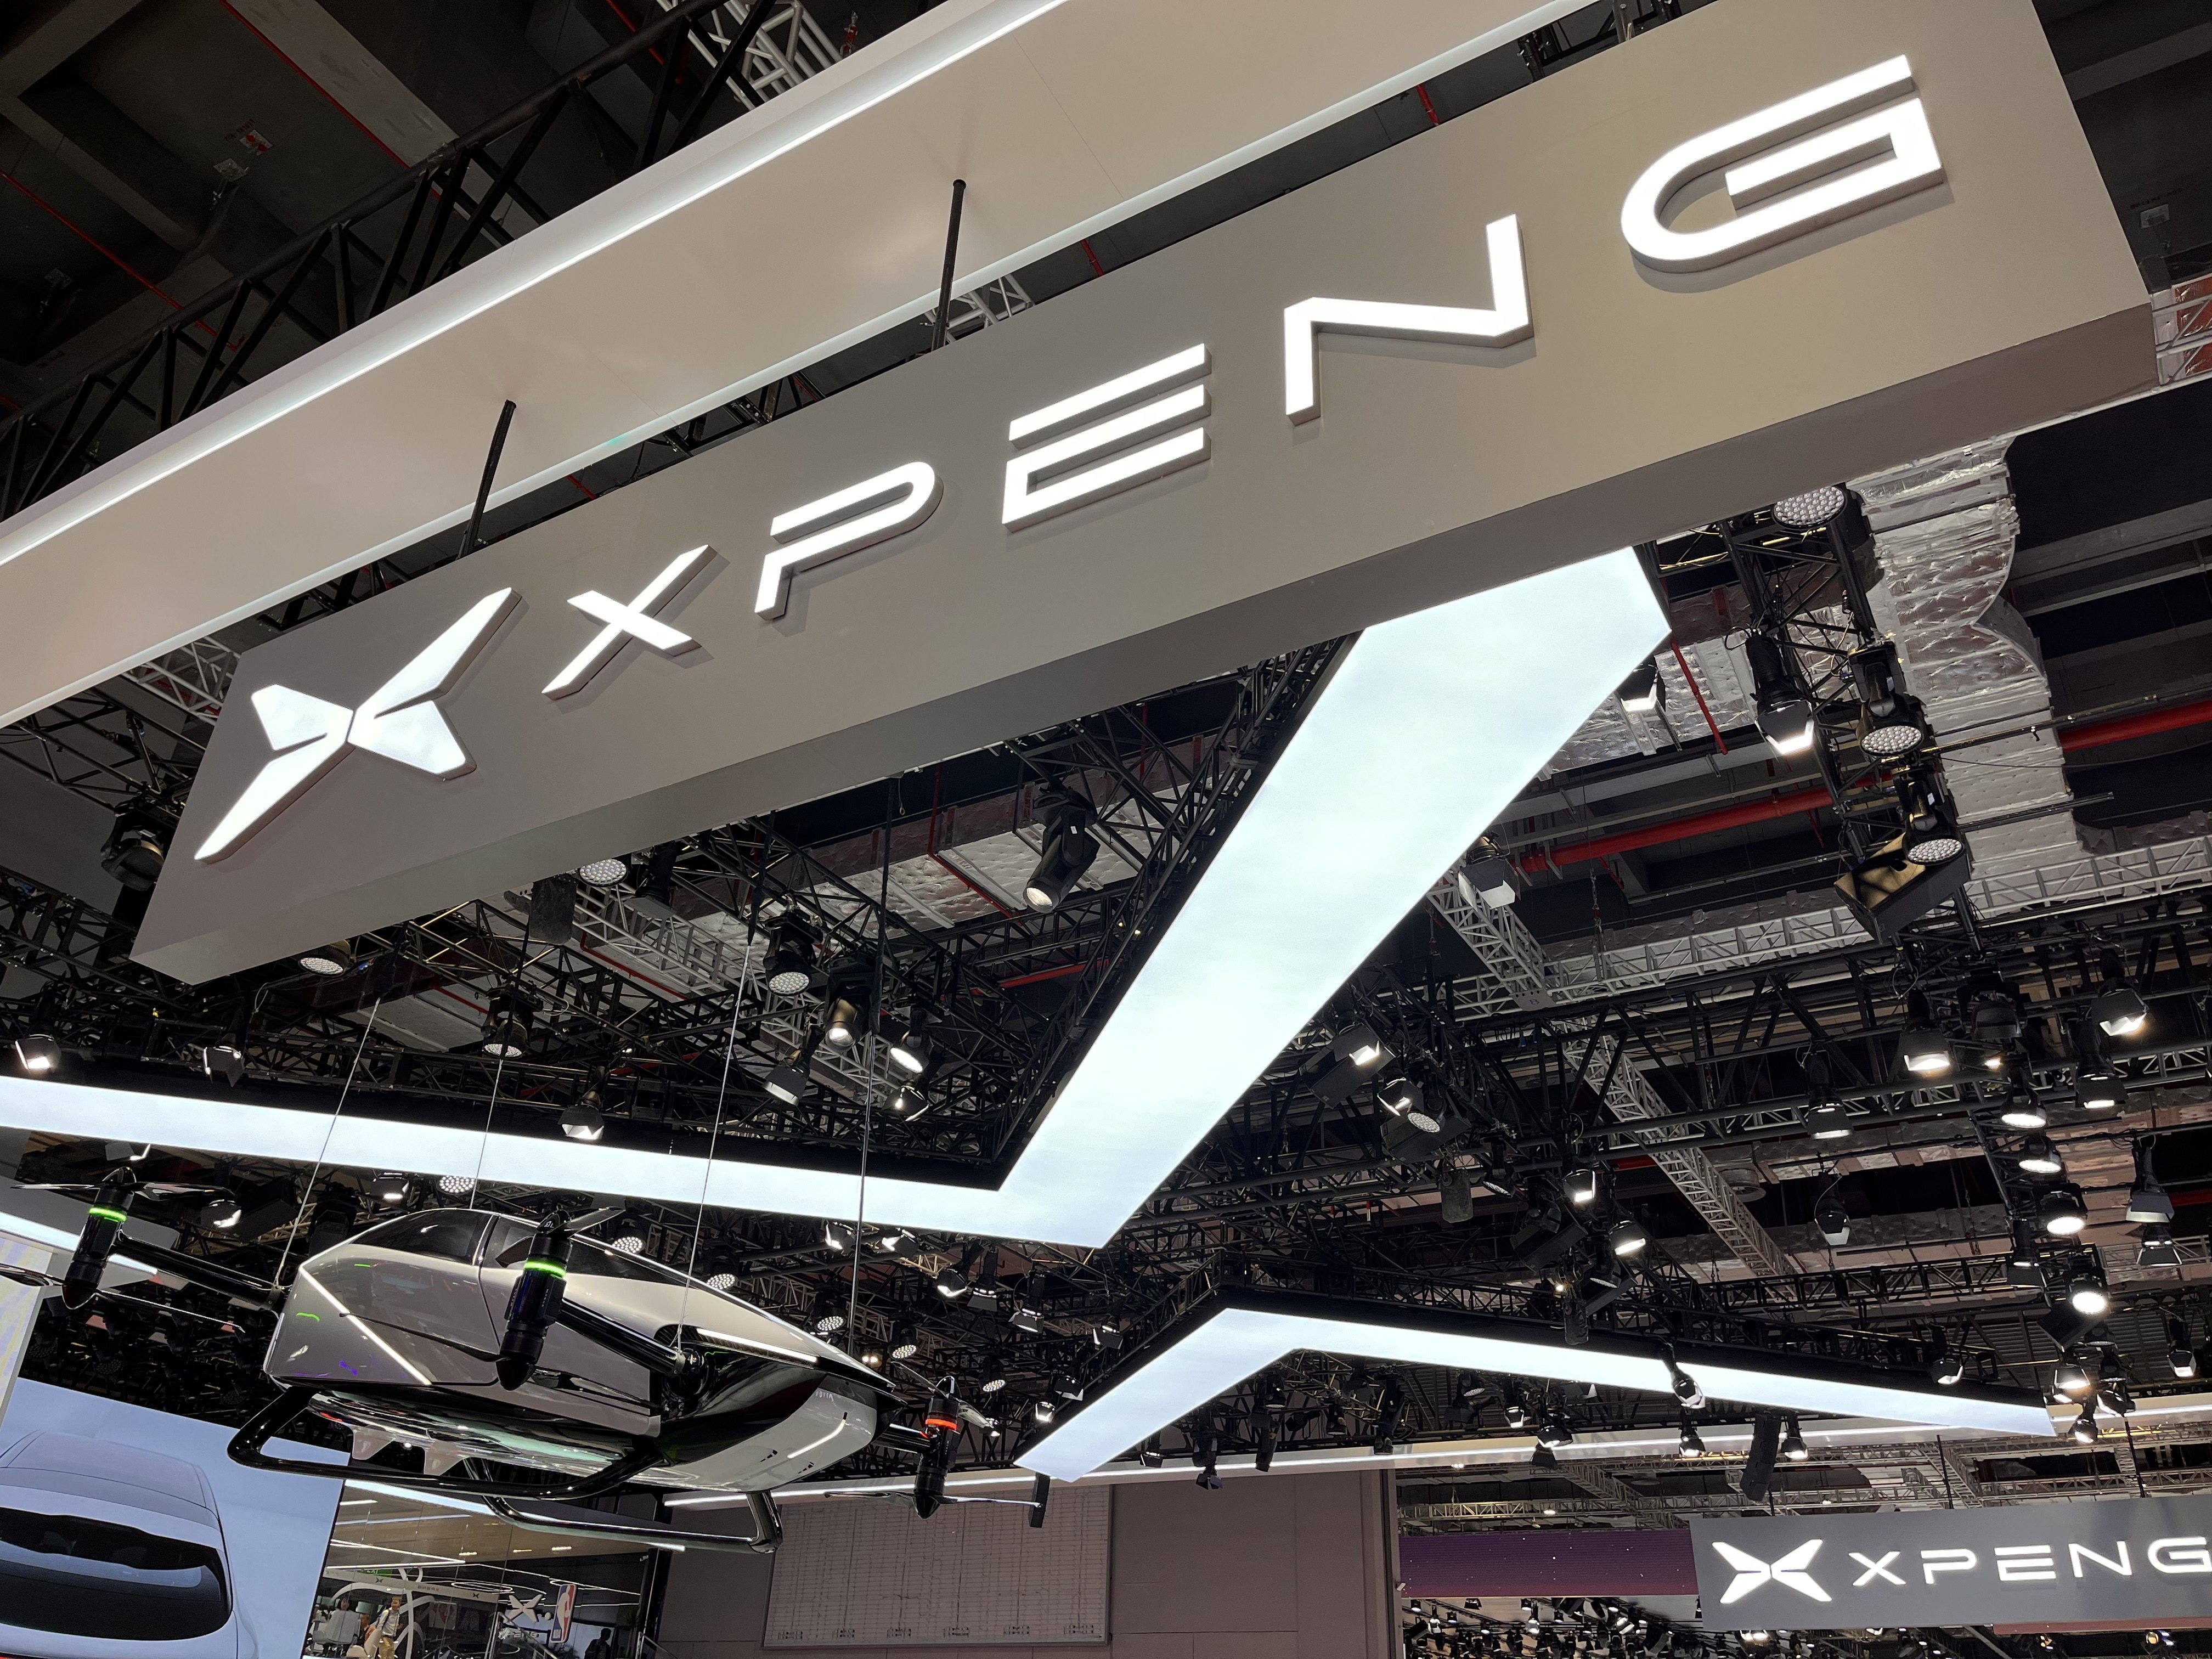 An Xpeng logo hangs over the company’s booth at the 20th Shanghai International Automobile Industry Exhibition at the National Exhibition and Convention Center in Shanghai on April 19, 2023. Photo: VCG via Getty Images